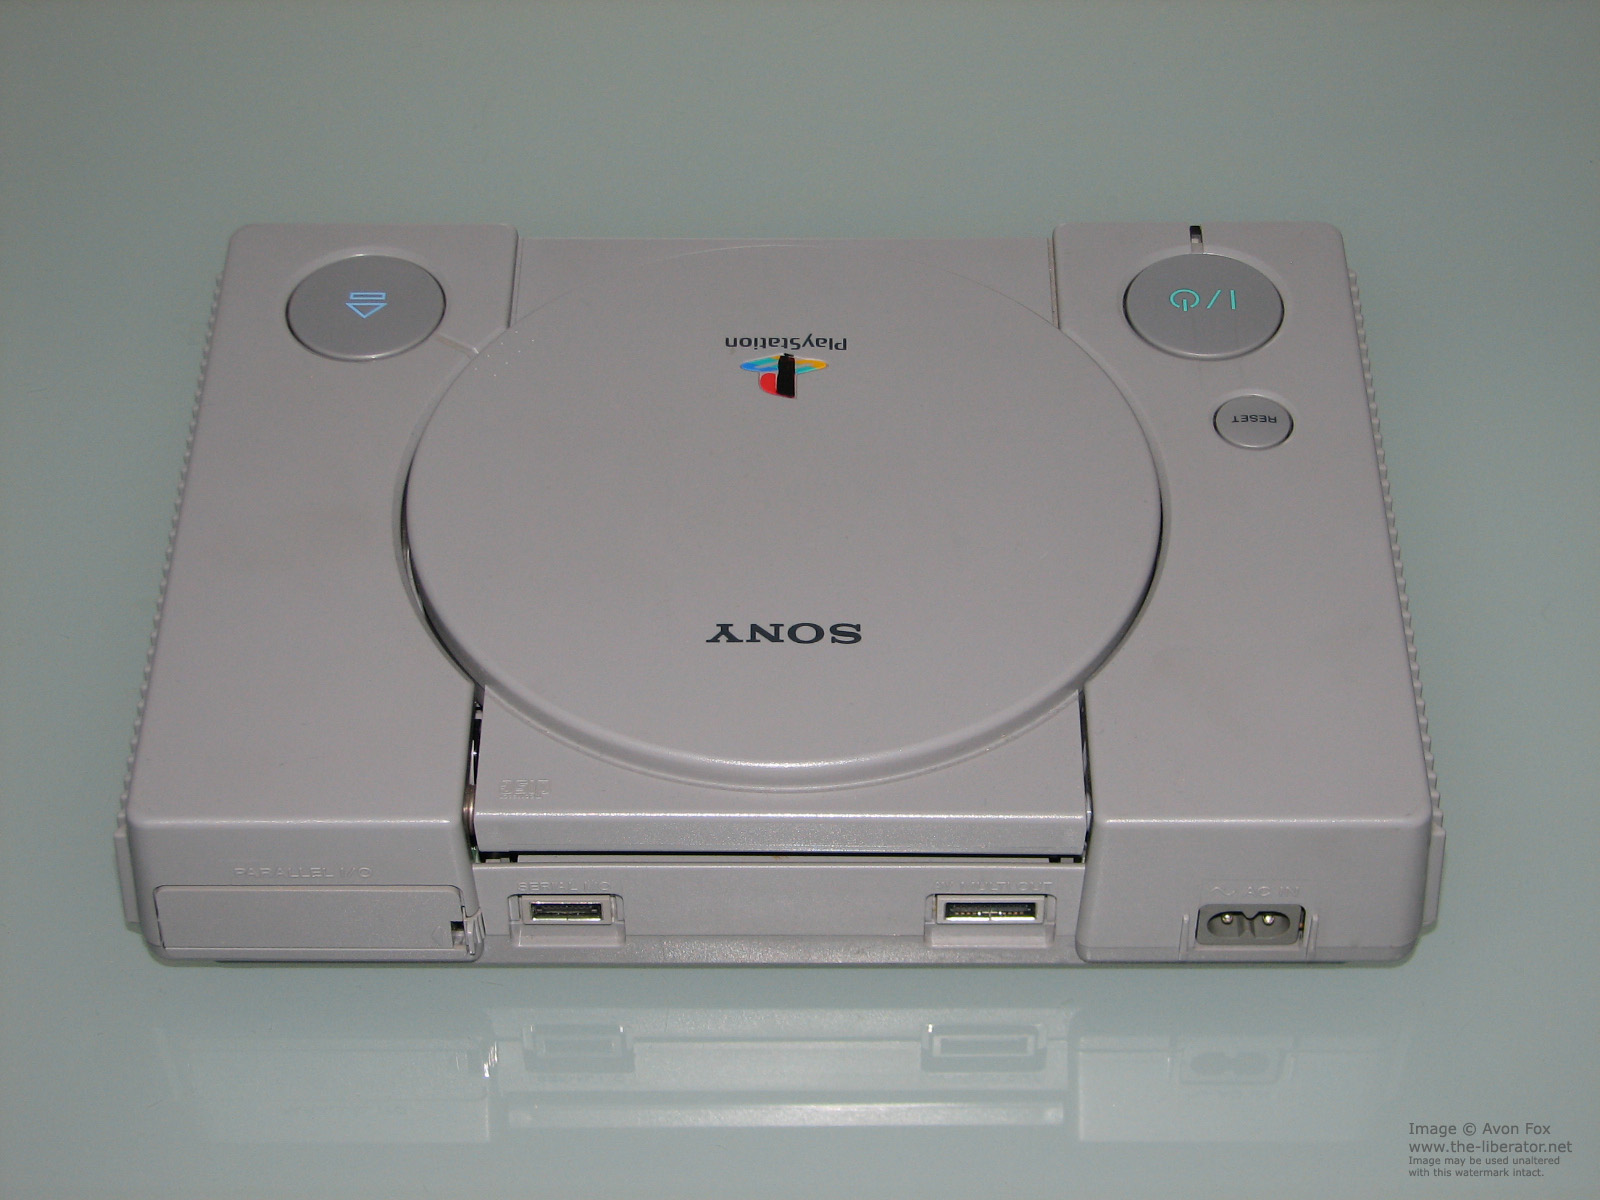 ps1 scph 7502